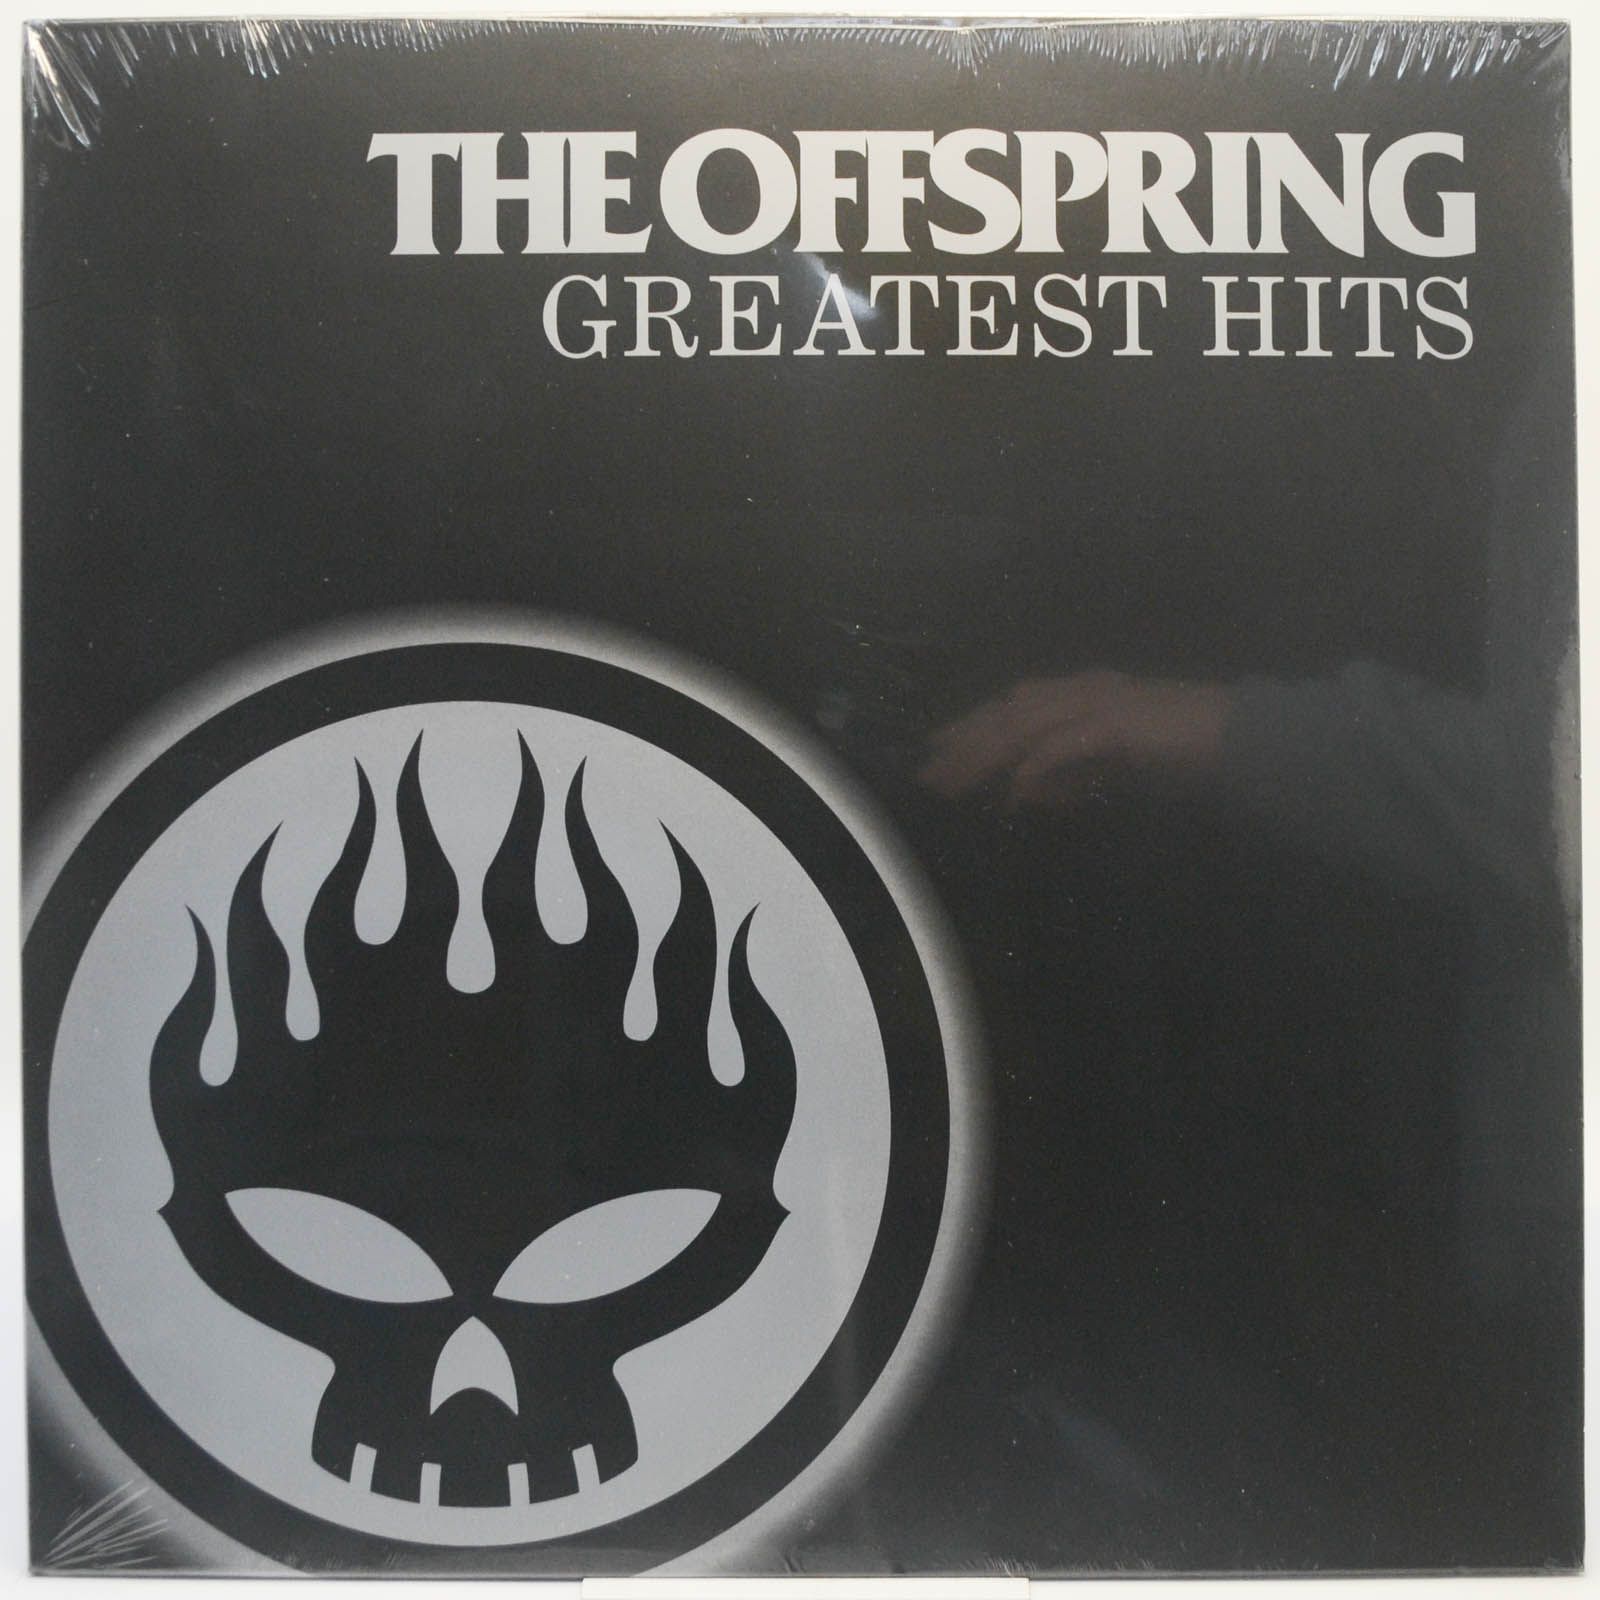 Offspring — Greatest Hits, 2005